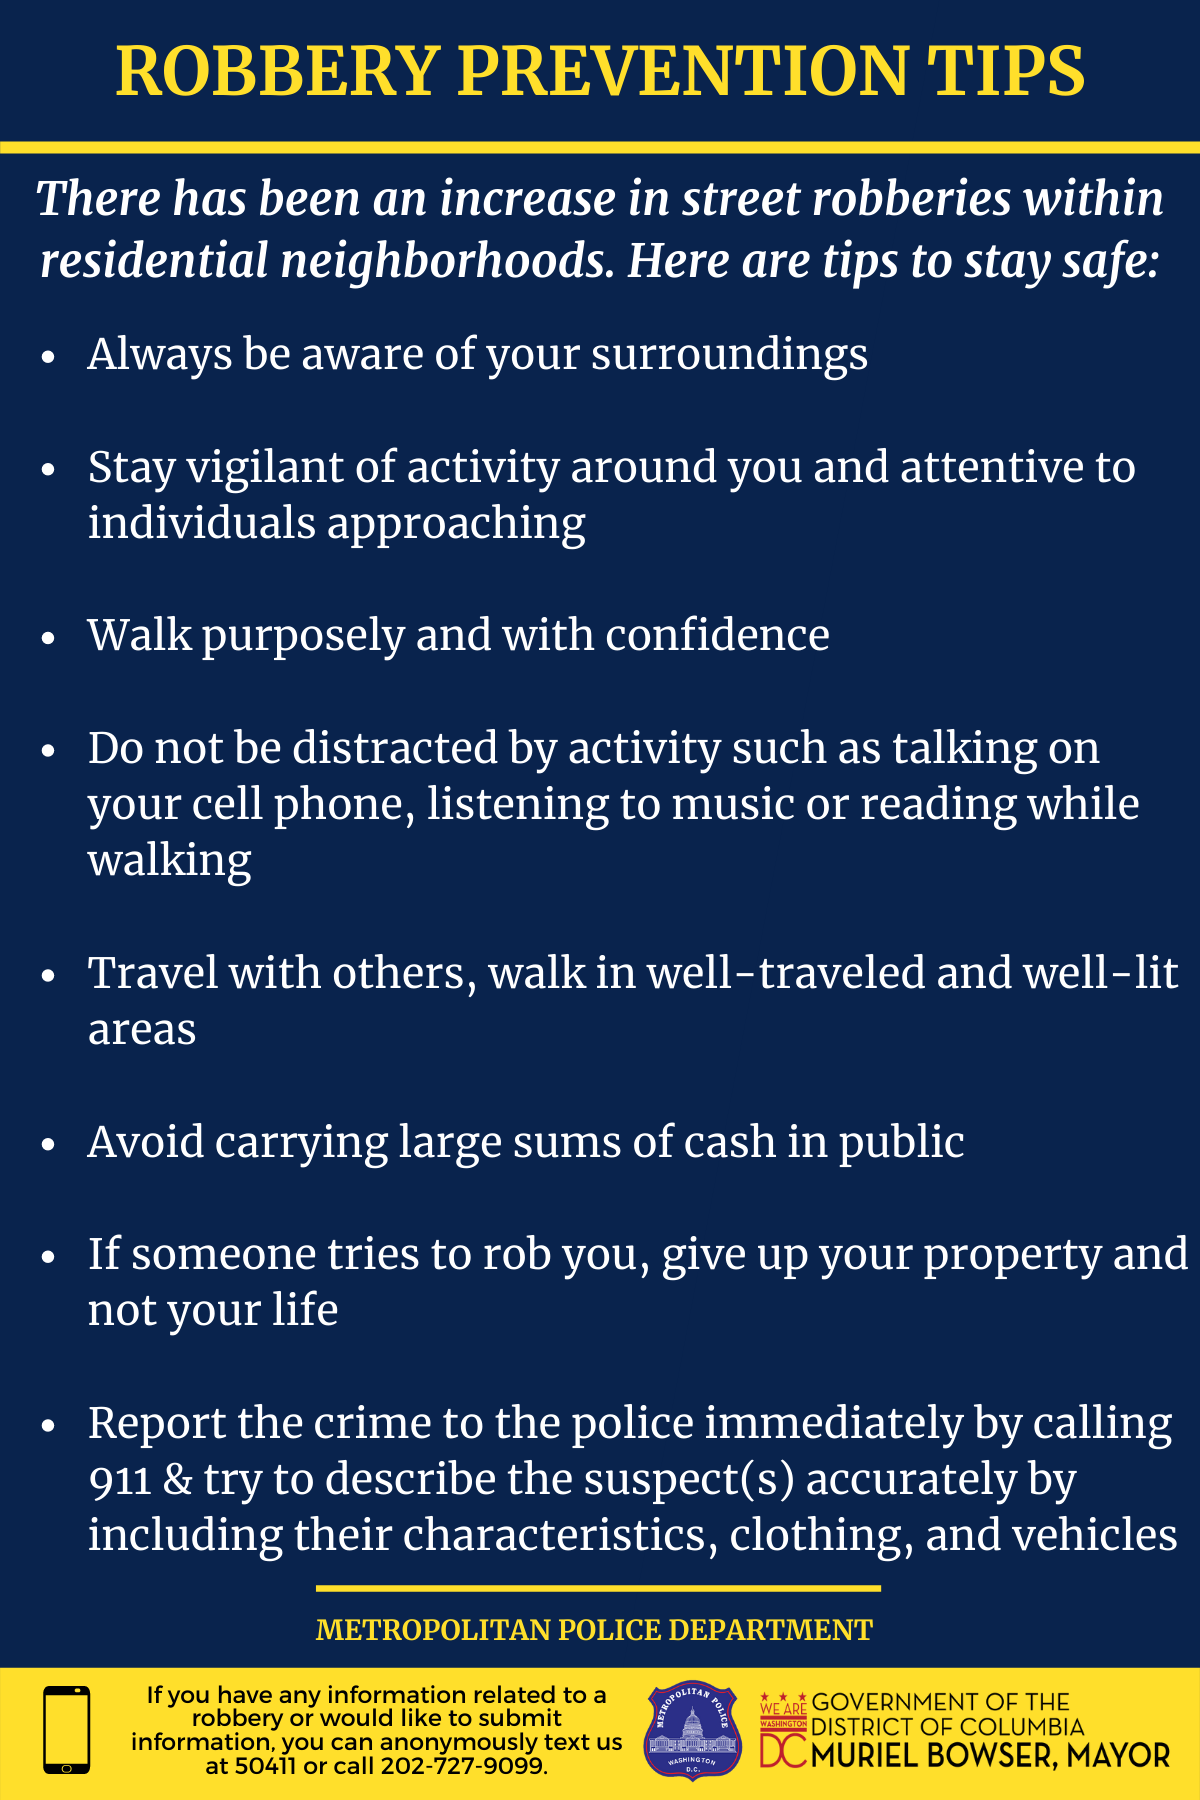 Robbery Prevention Tips (English) 10.28.21.png